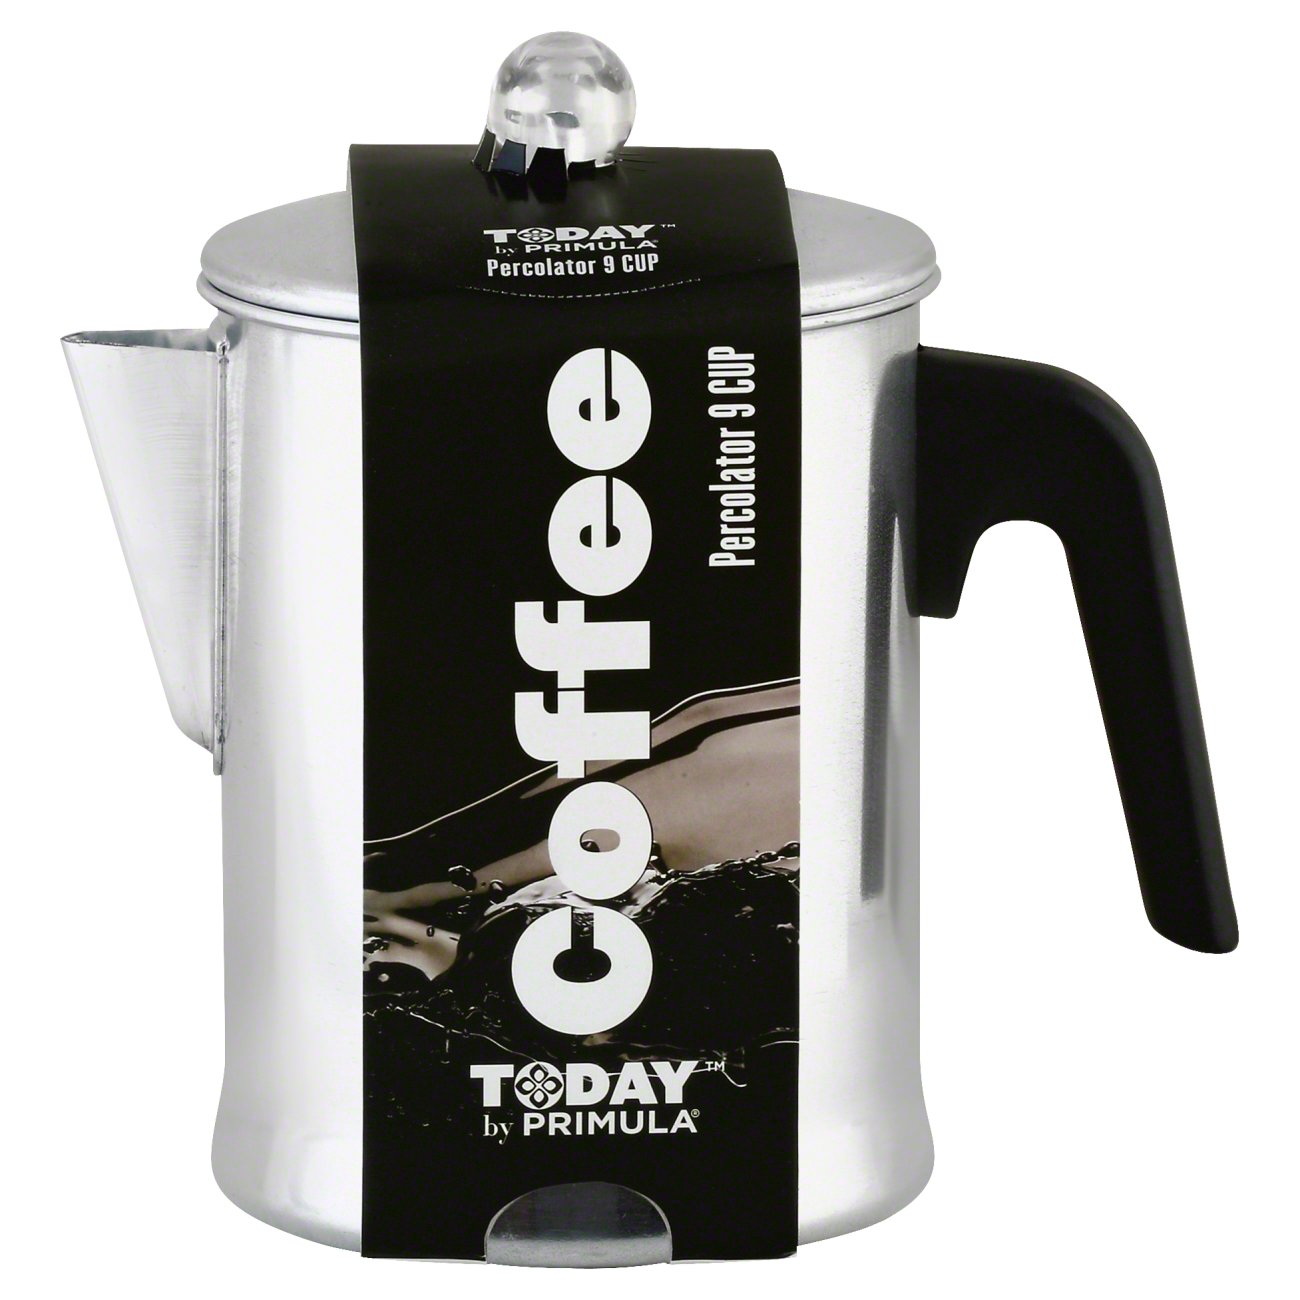 Northeast News  Remember This? The electric coffee percolator